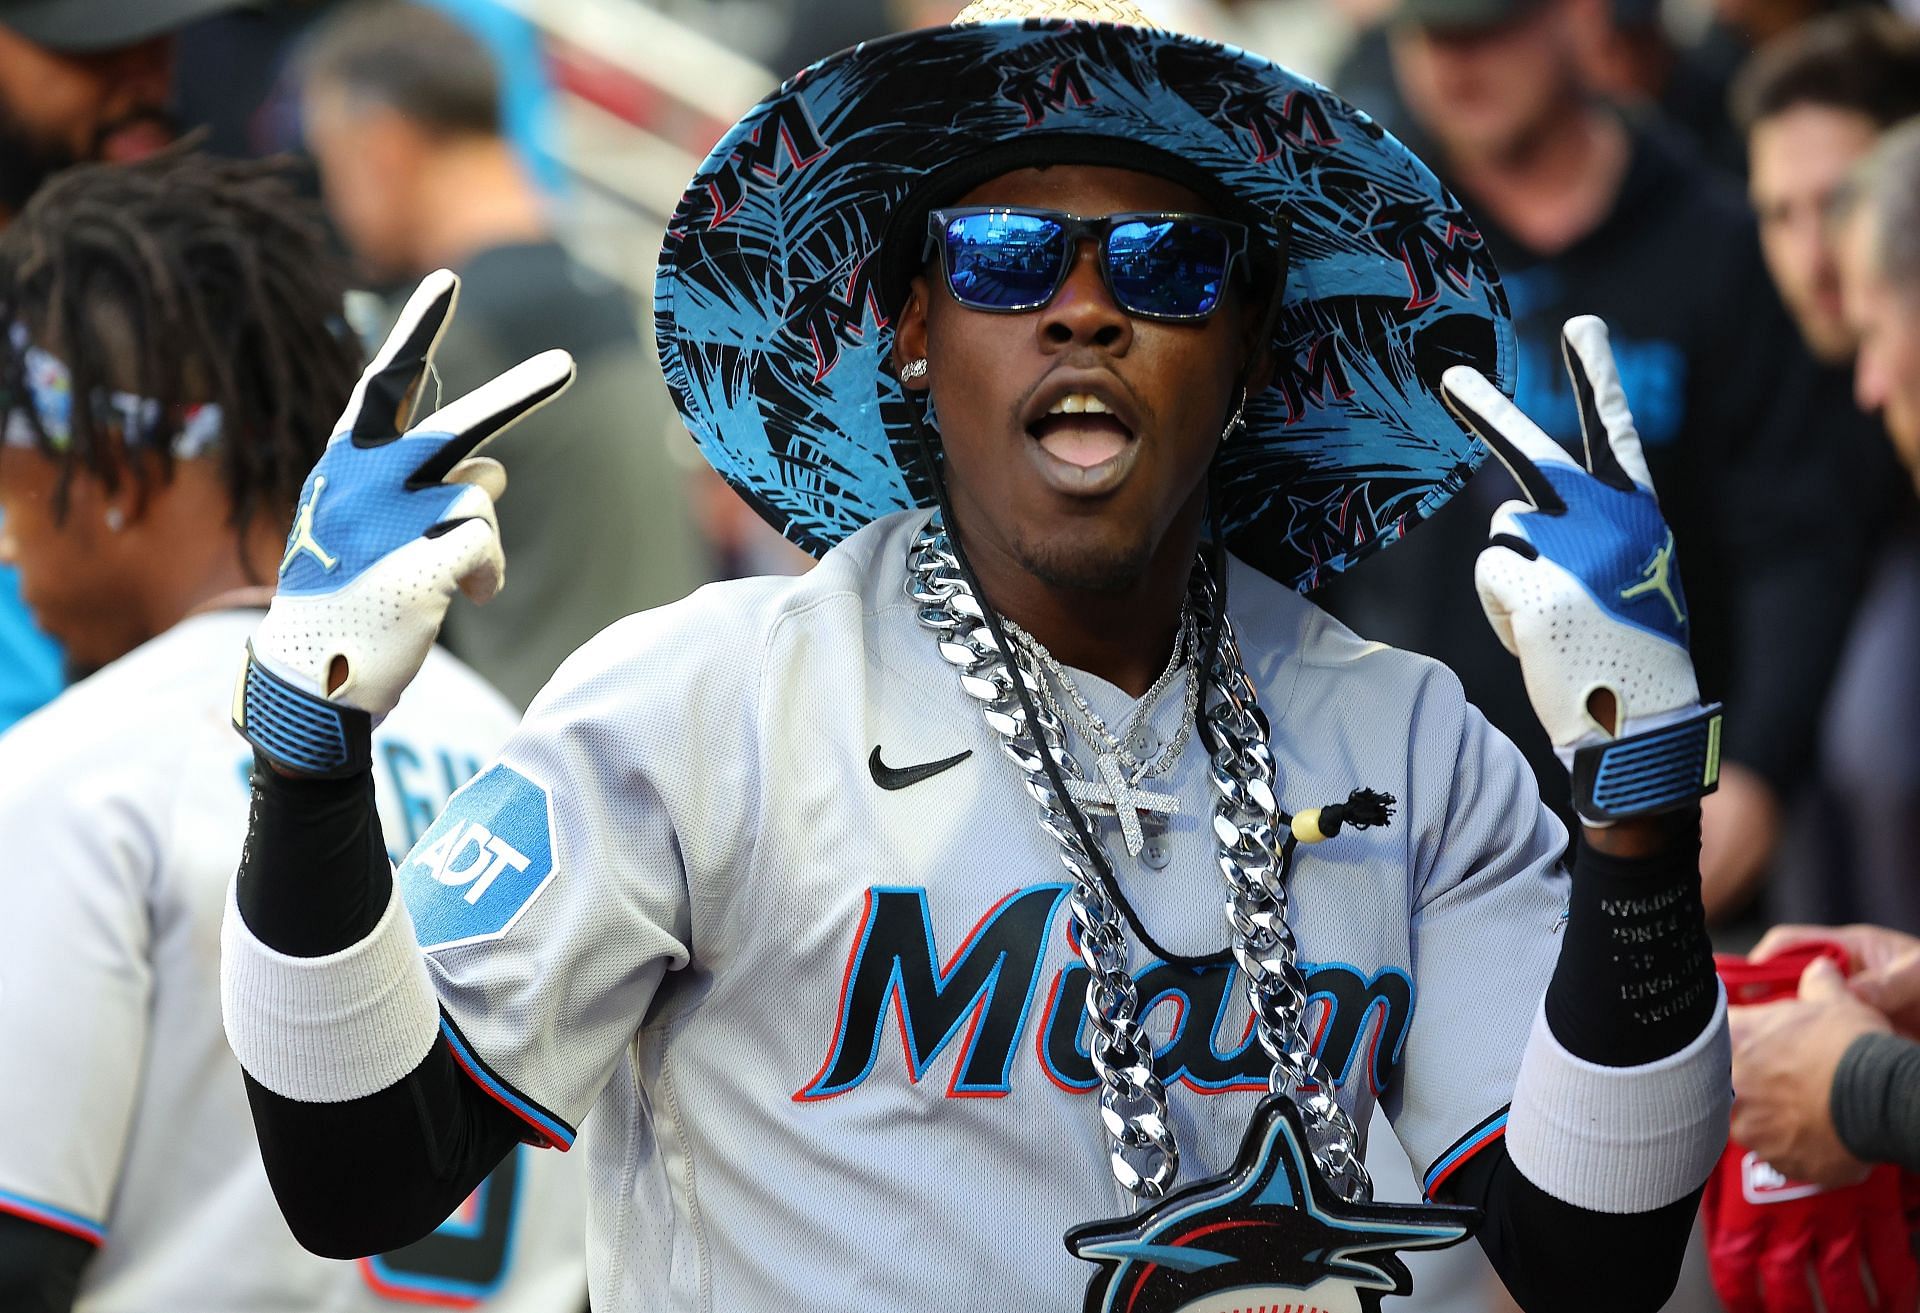 Marlins' Jazz Chisholm is winning fans over with his energetic